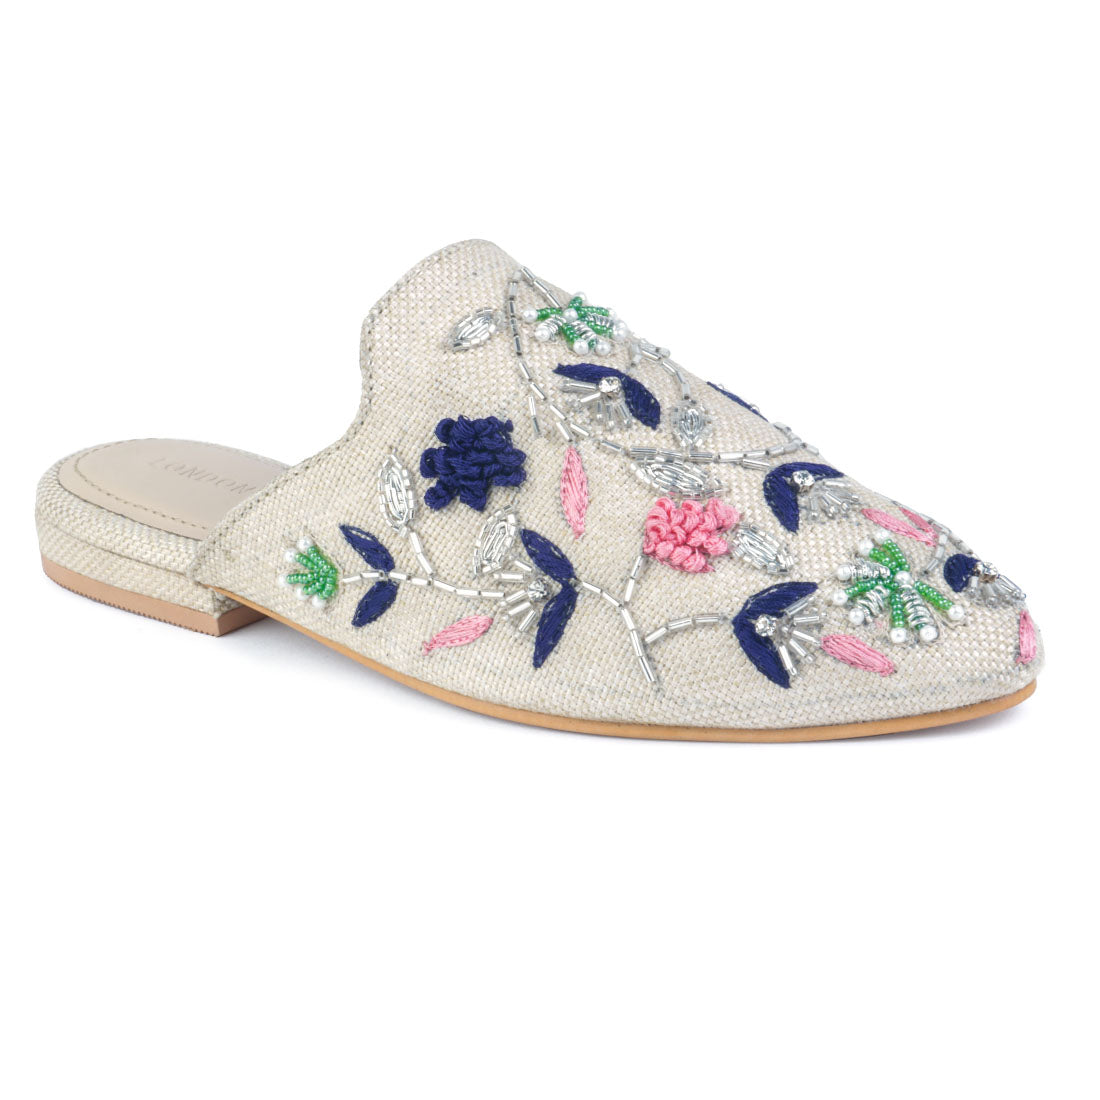 Beige Floral Embroidered Mules - Beige